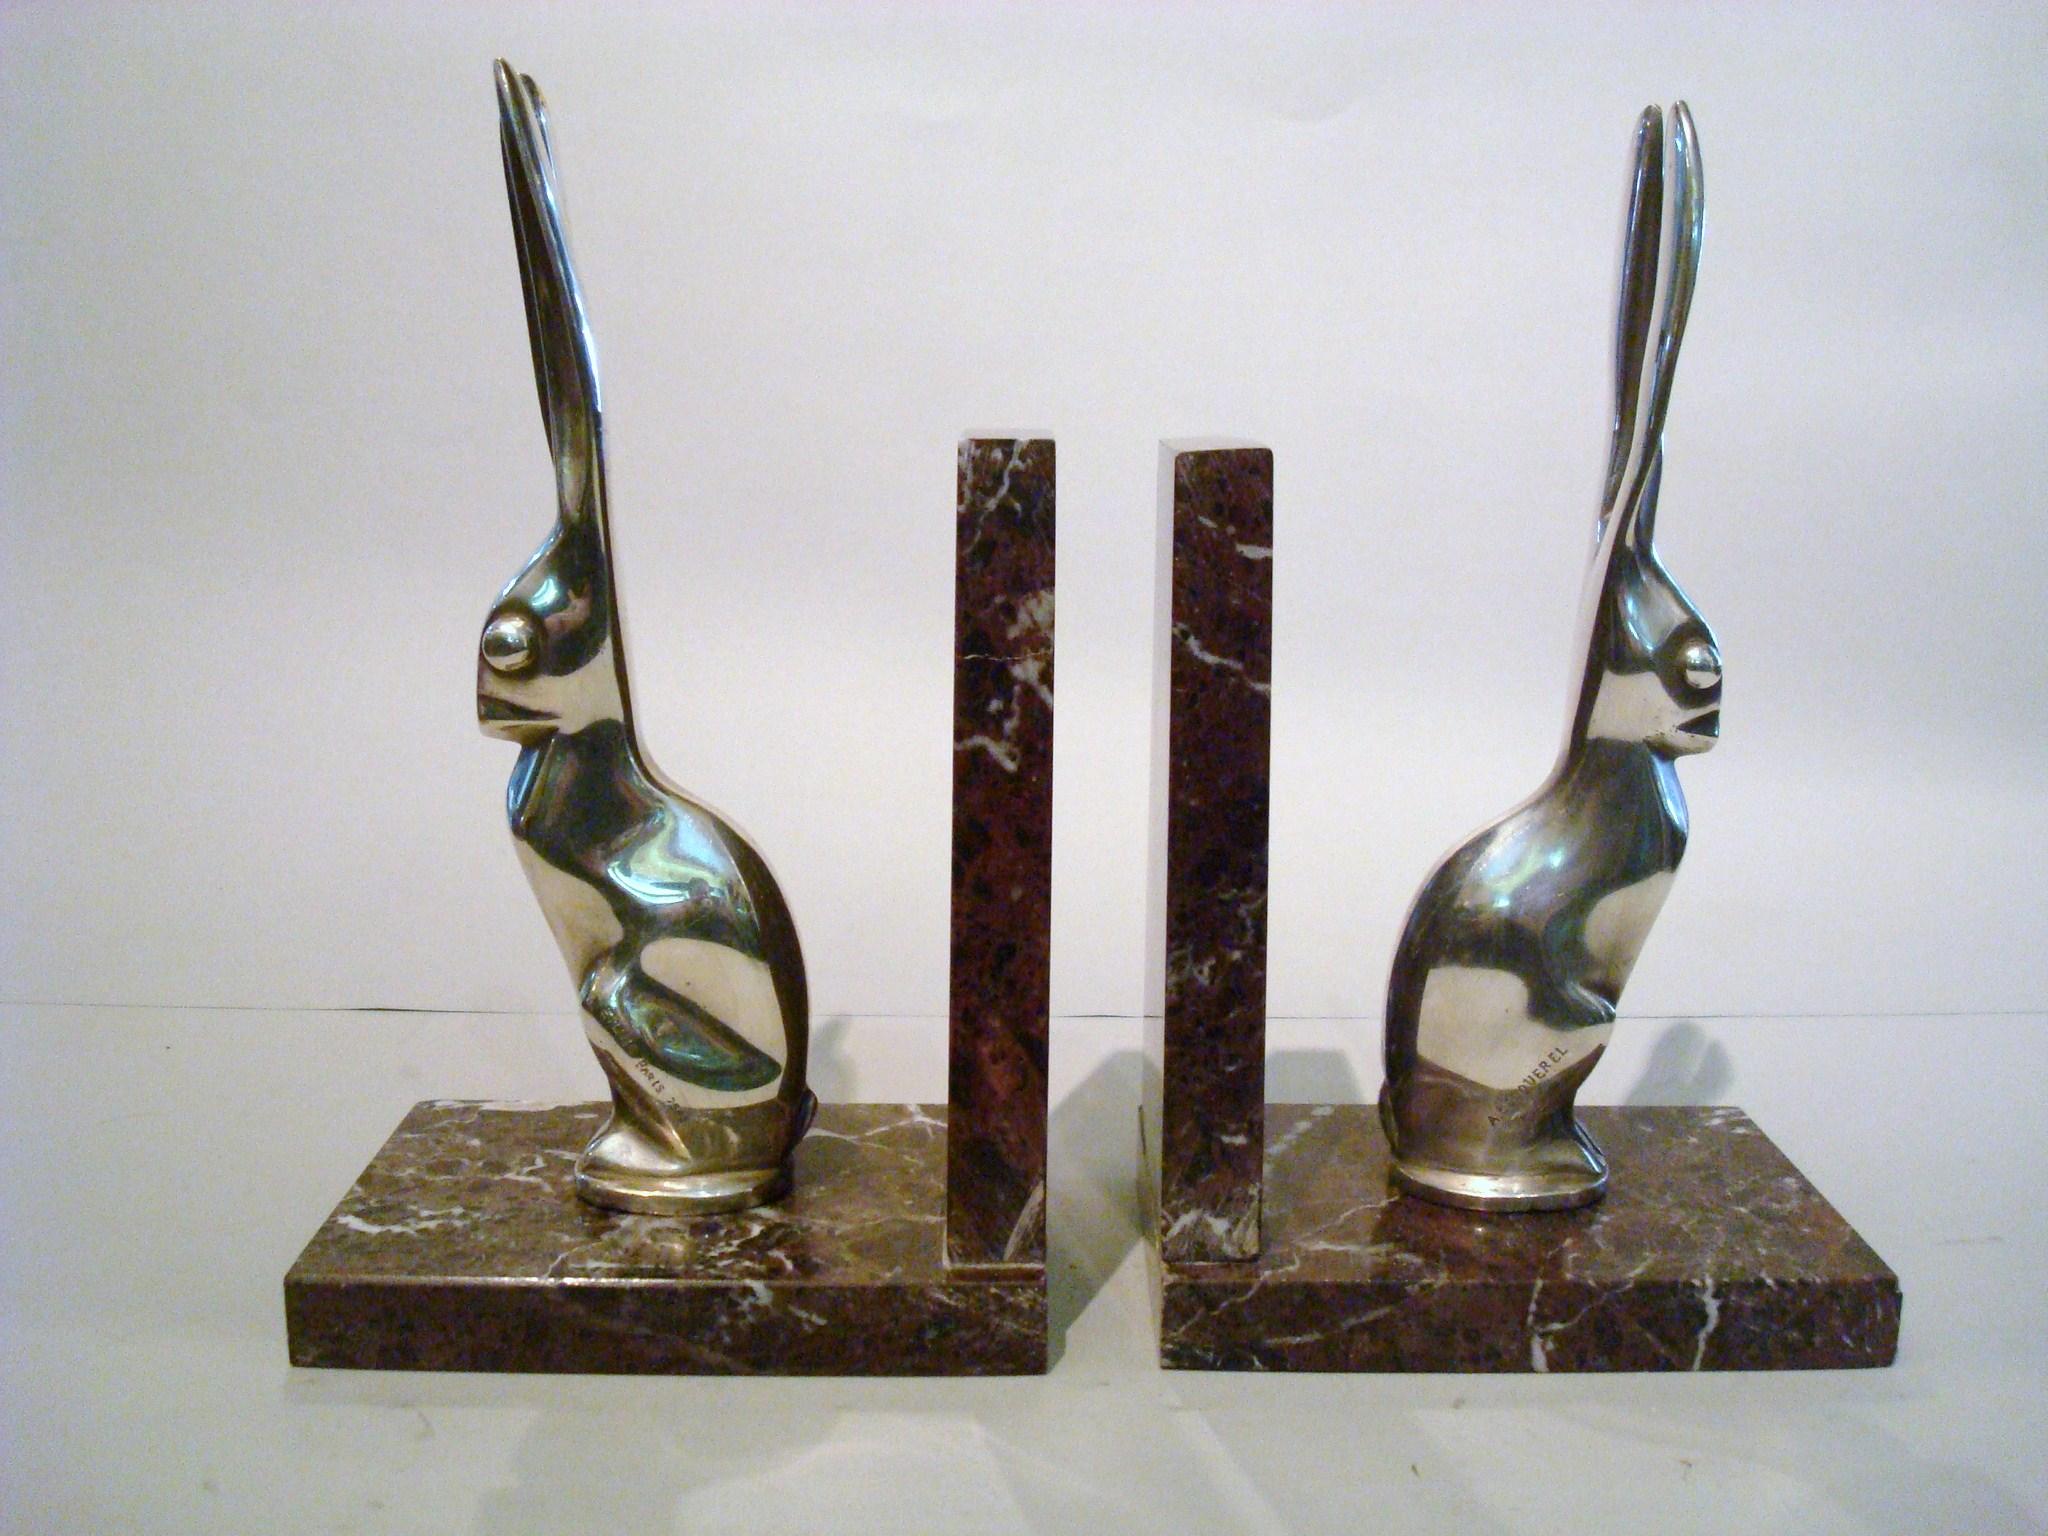 Silvered Art Deco Hare or Rabbit bookends designed by Becquerel For Sale